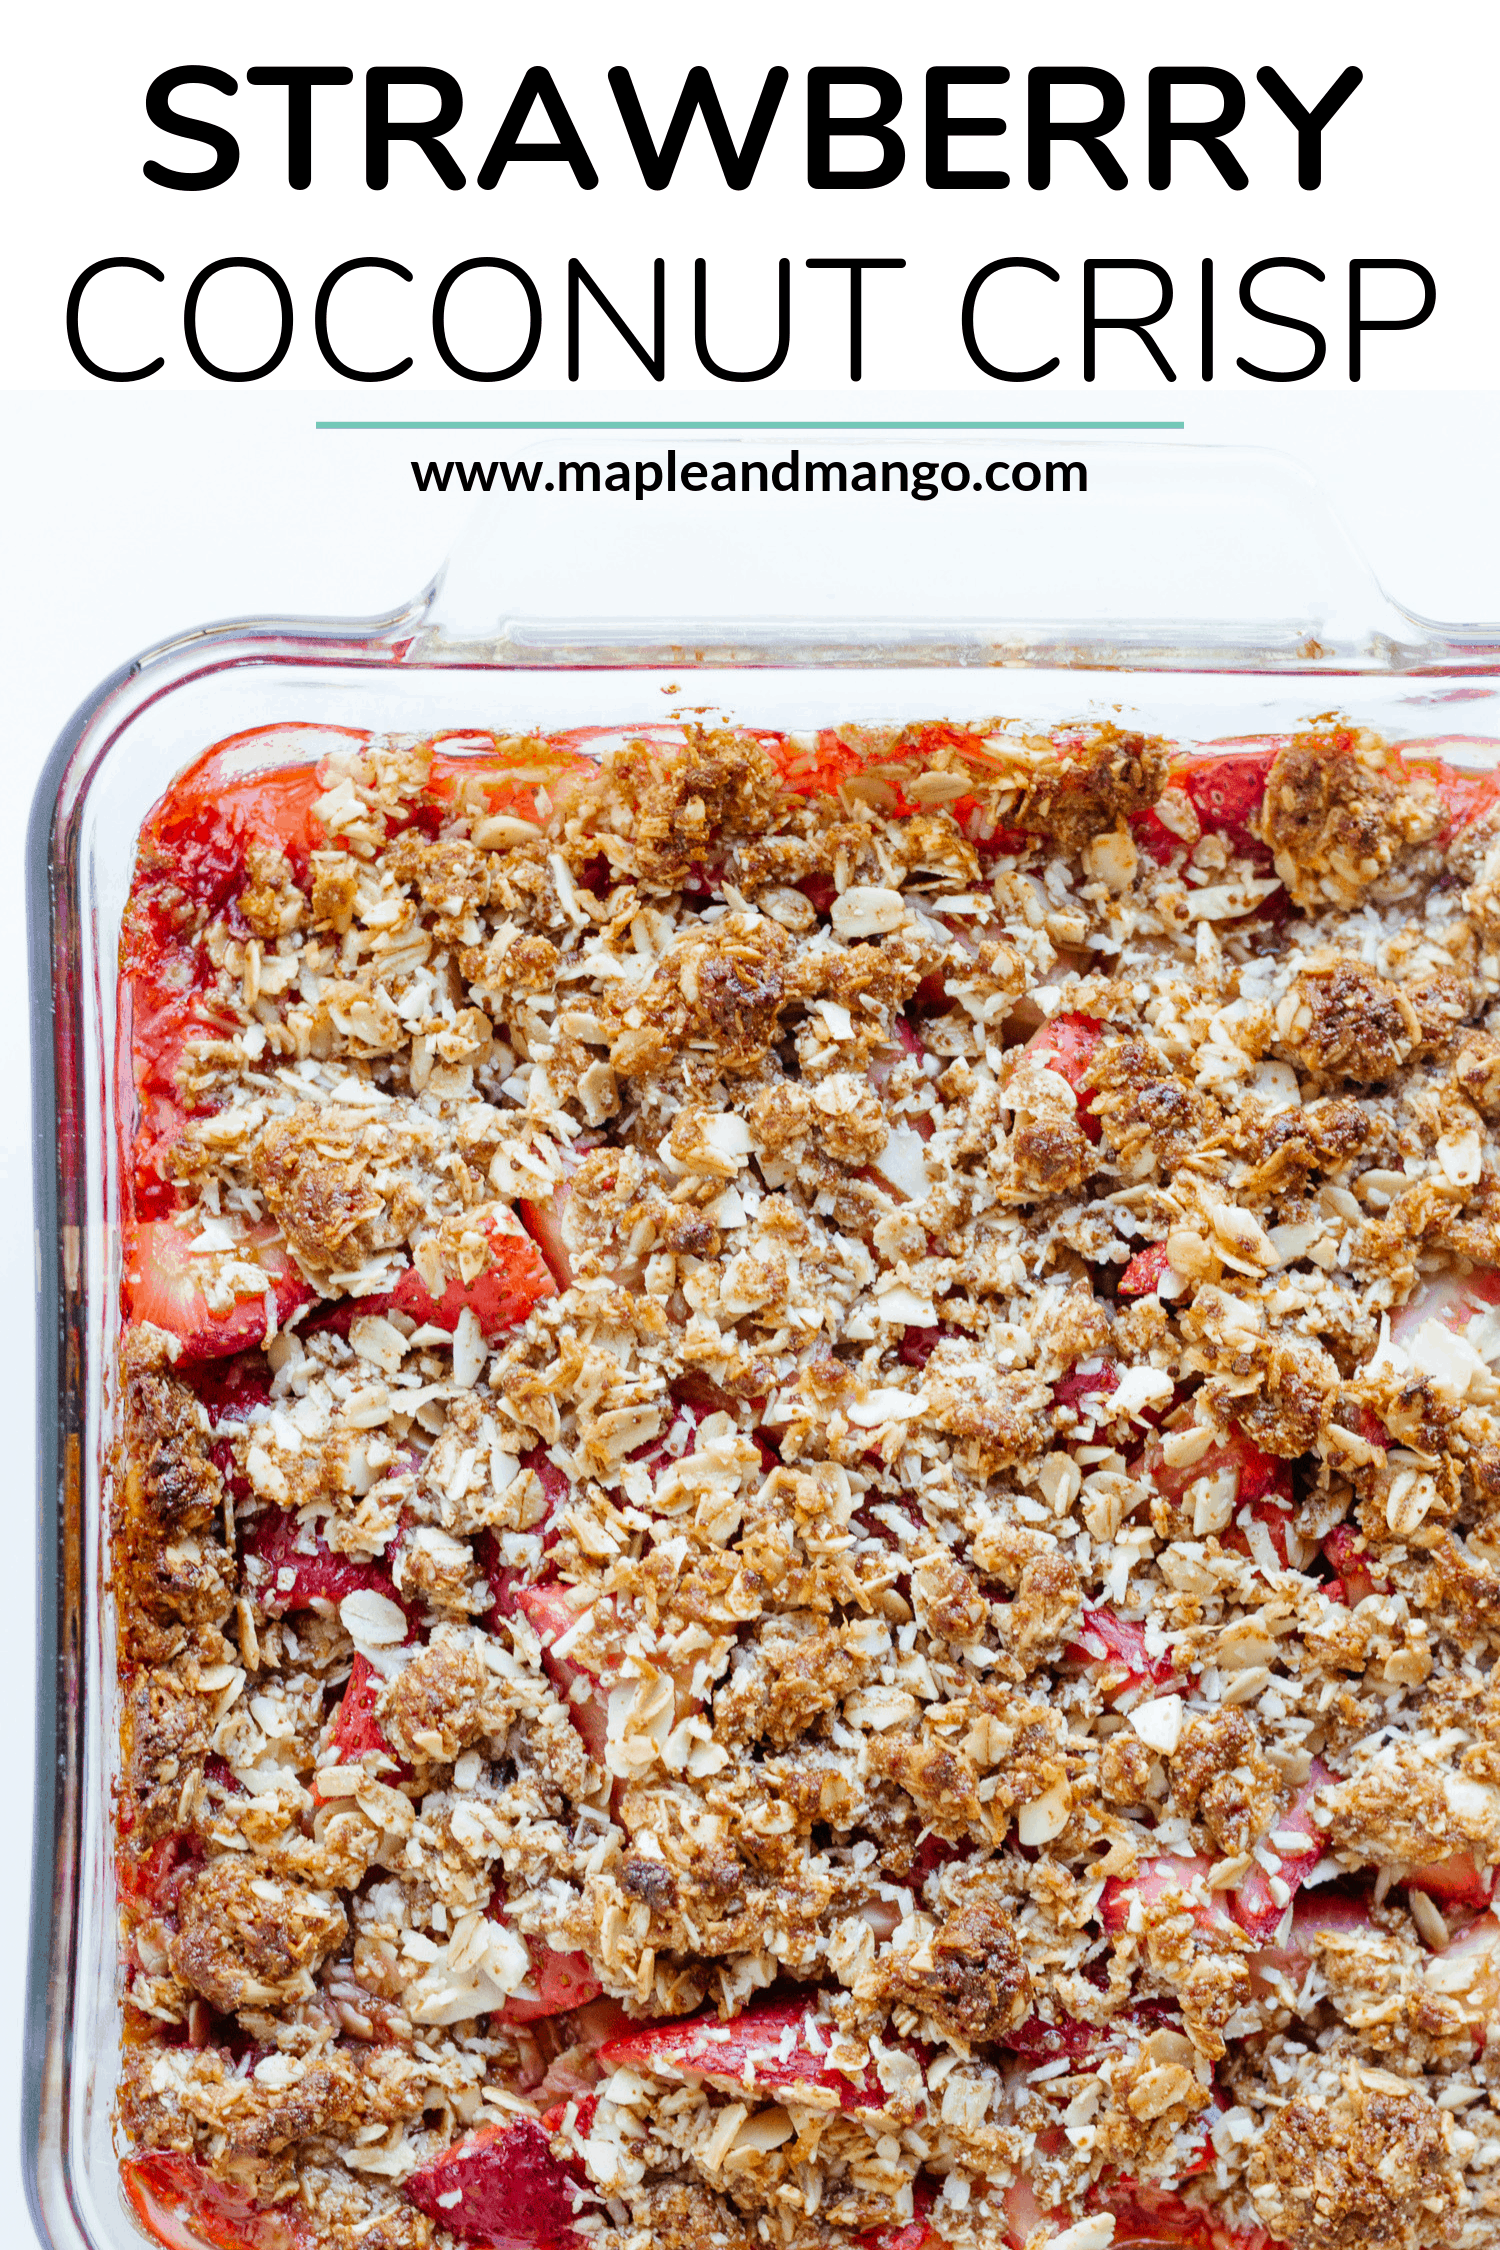 Pinterest image of baking dish of strawberry coconut crisp with text overlay of recipe title